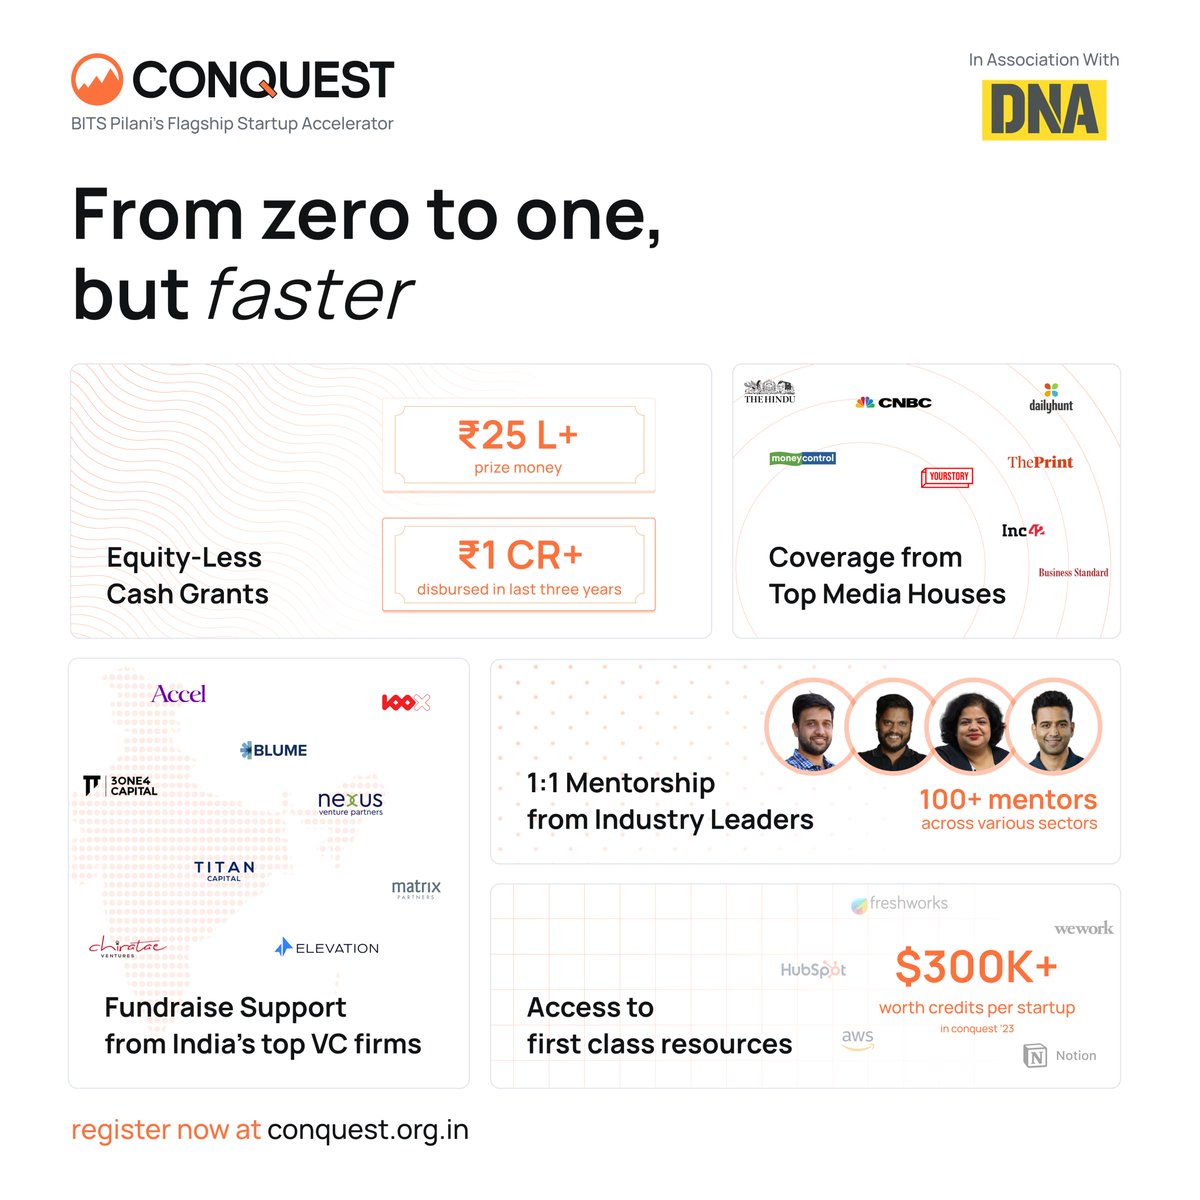 Ignite your startup journey with @ConquestBITS, BITS Pilani’s flagship startup accelerator 🚀

Through the 7 week hybrid program, gain access to equity-free grants worth INR 25L+, mentoring by top CXO’s, investment opportunities, media visibility and much more, all at no cost!